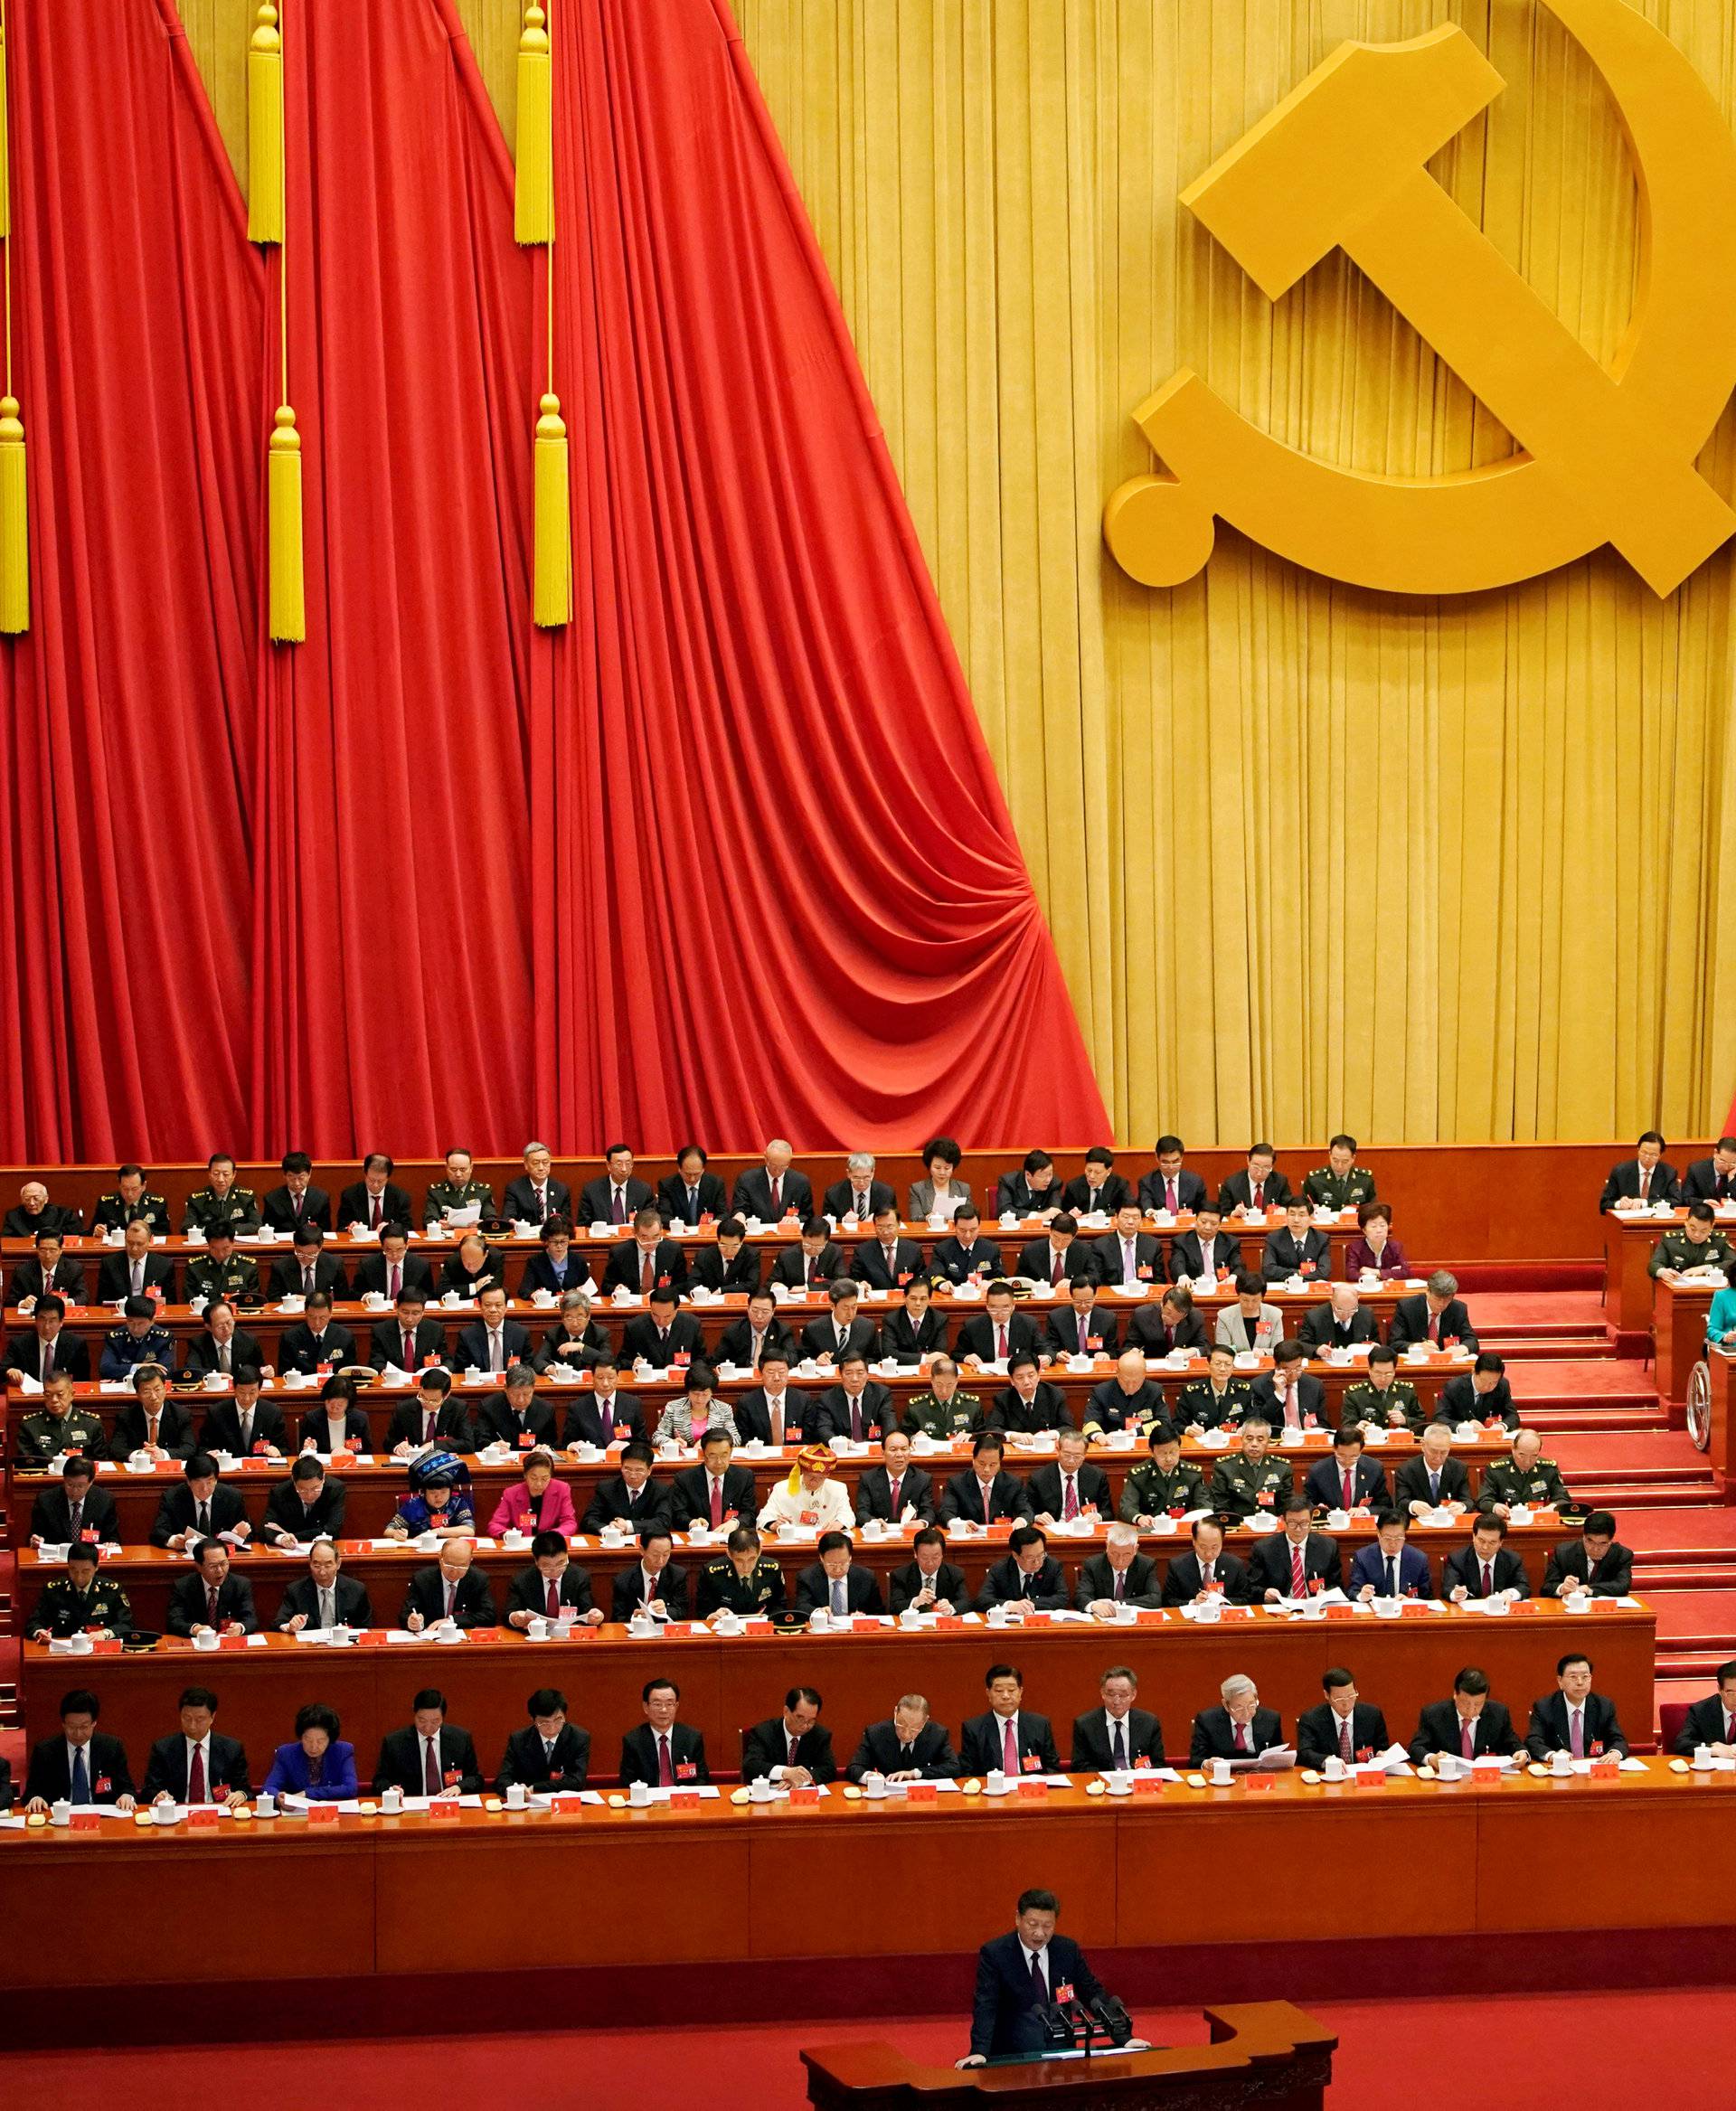 FILE PHOTO: Chinese President Xi Jinping speaks during the opening session of the 19th National Congress of the Communist Party of China at the Great Hall of the People in Beijing